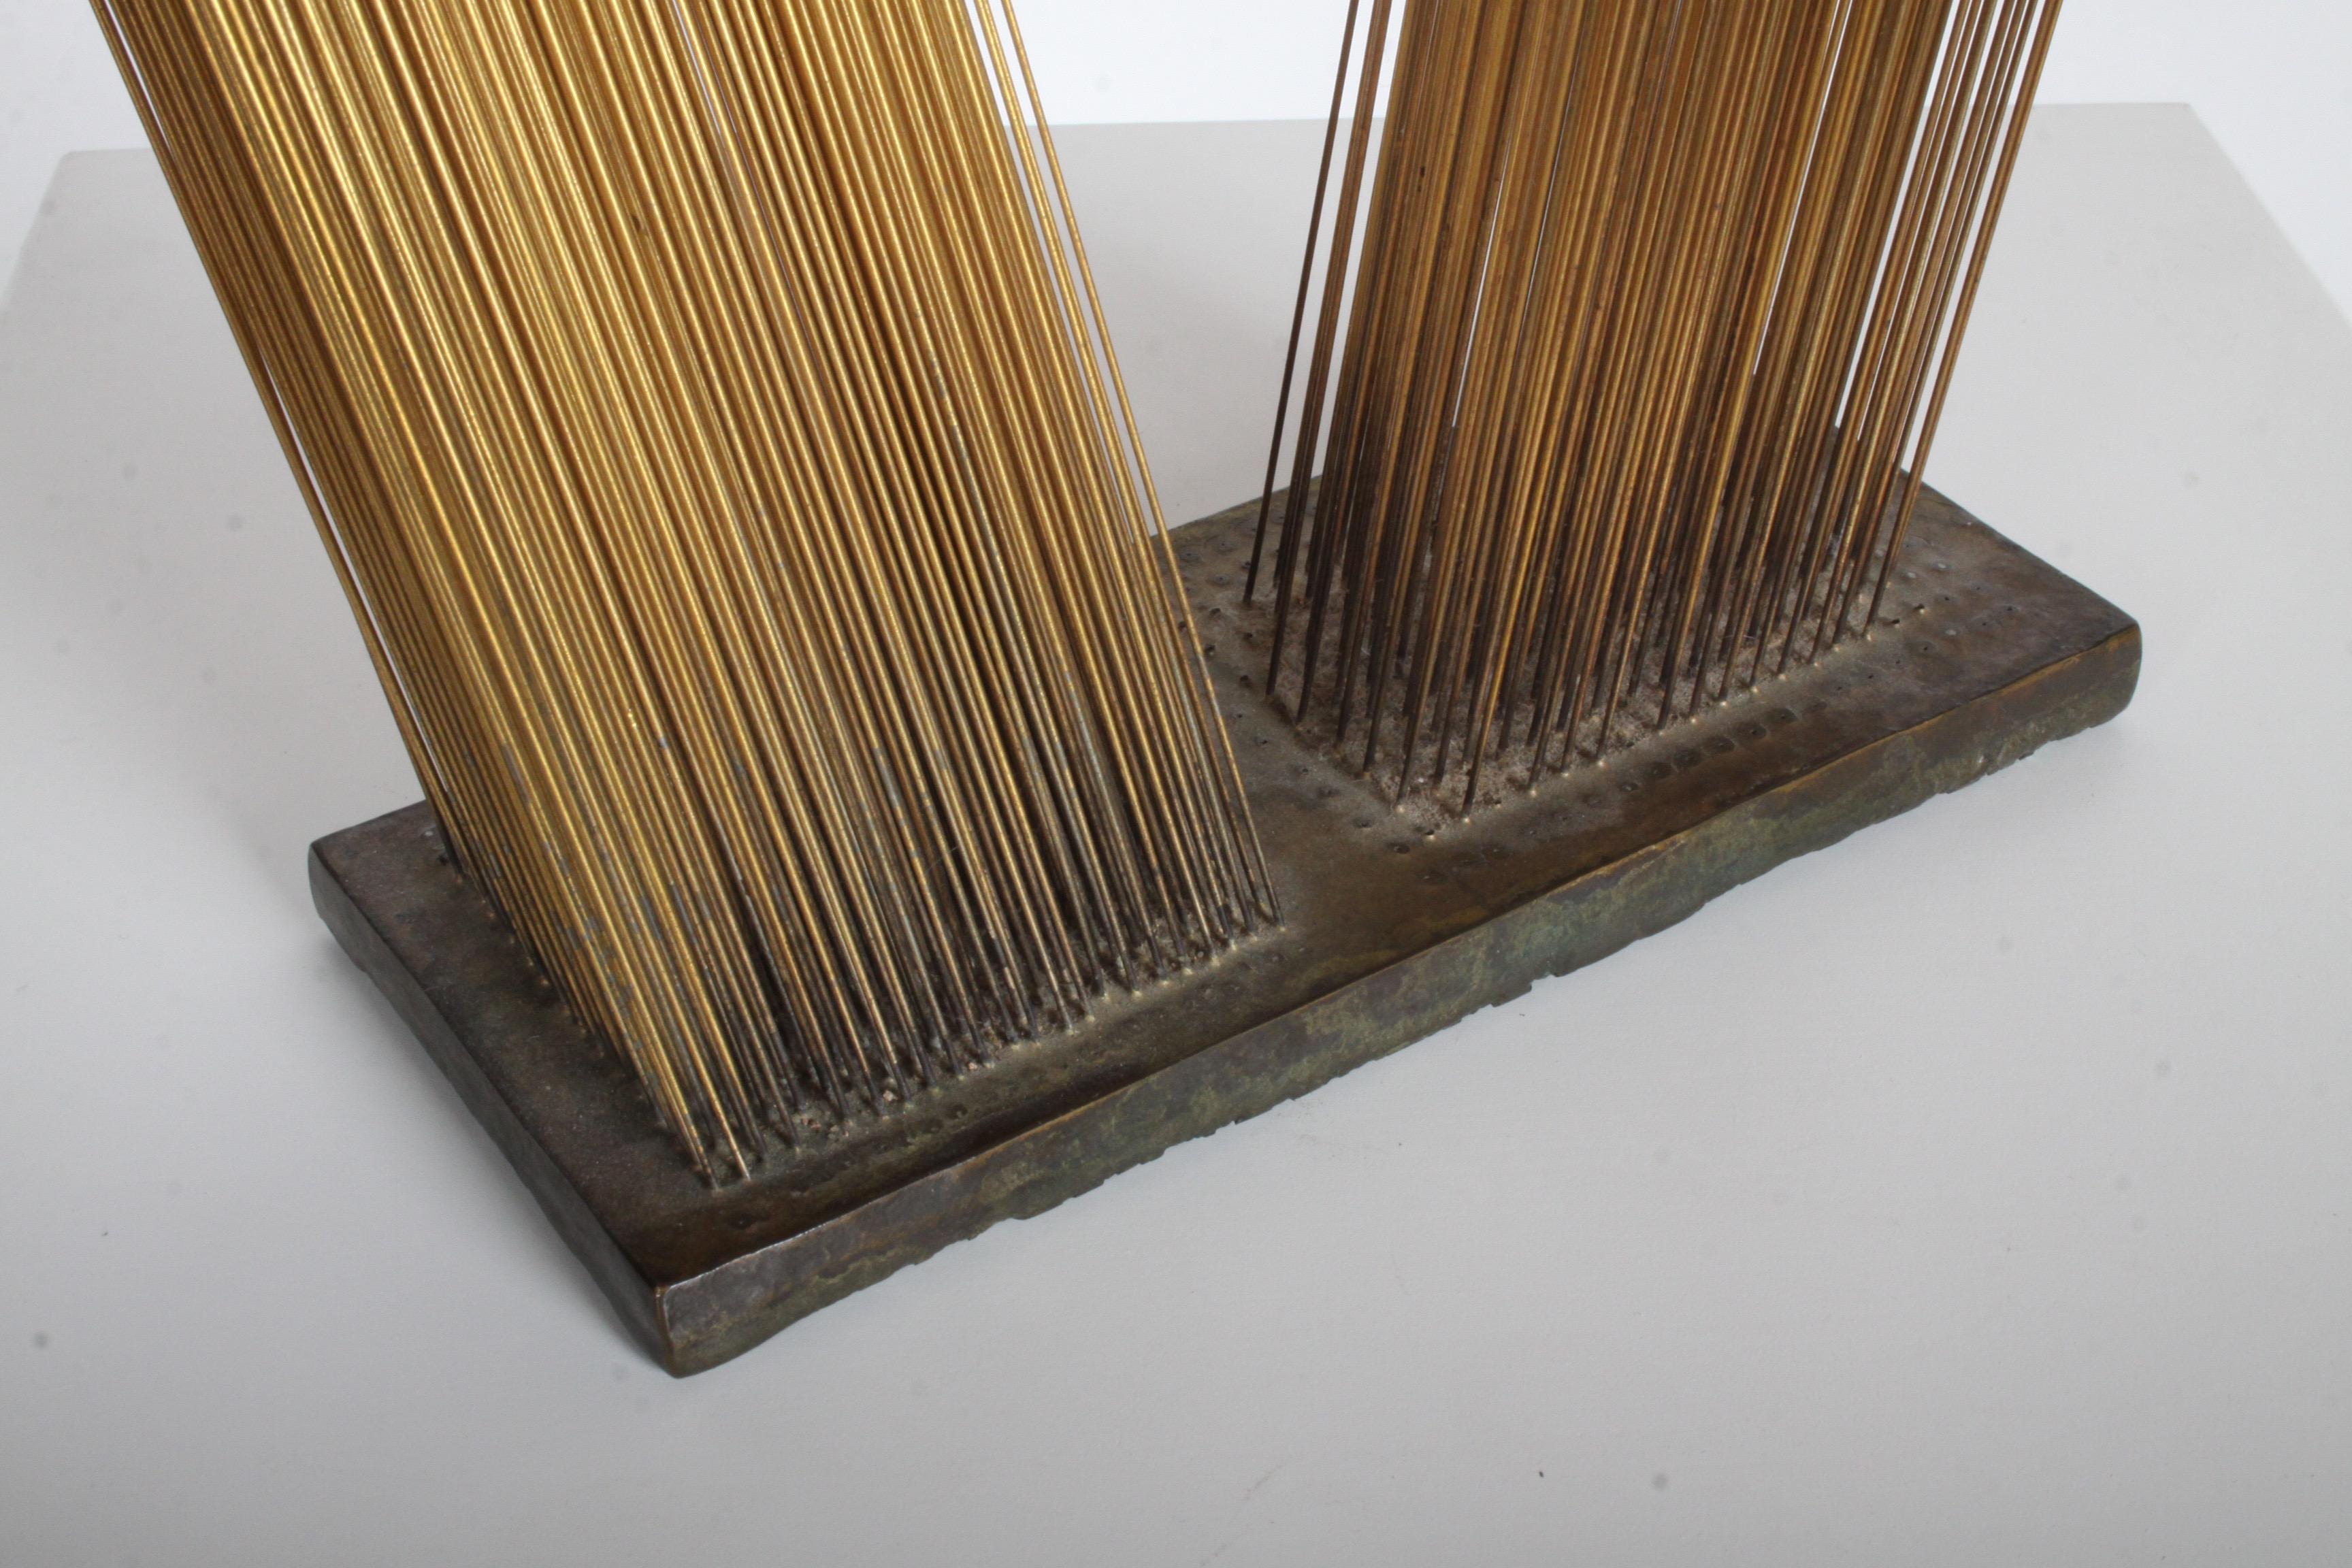 Harry Bertoia Gold Plated Bronze Sonambient Sculpture In Good Condition For Sale In St. Louis, MO